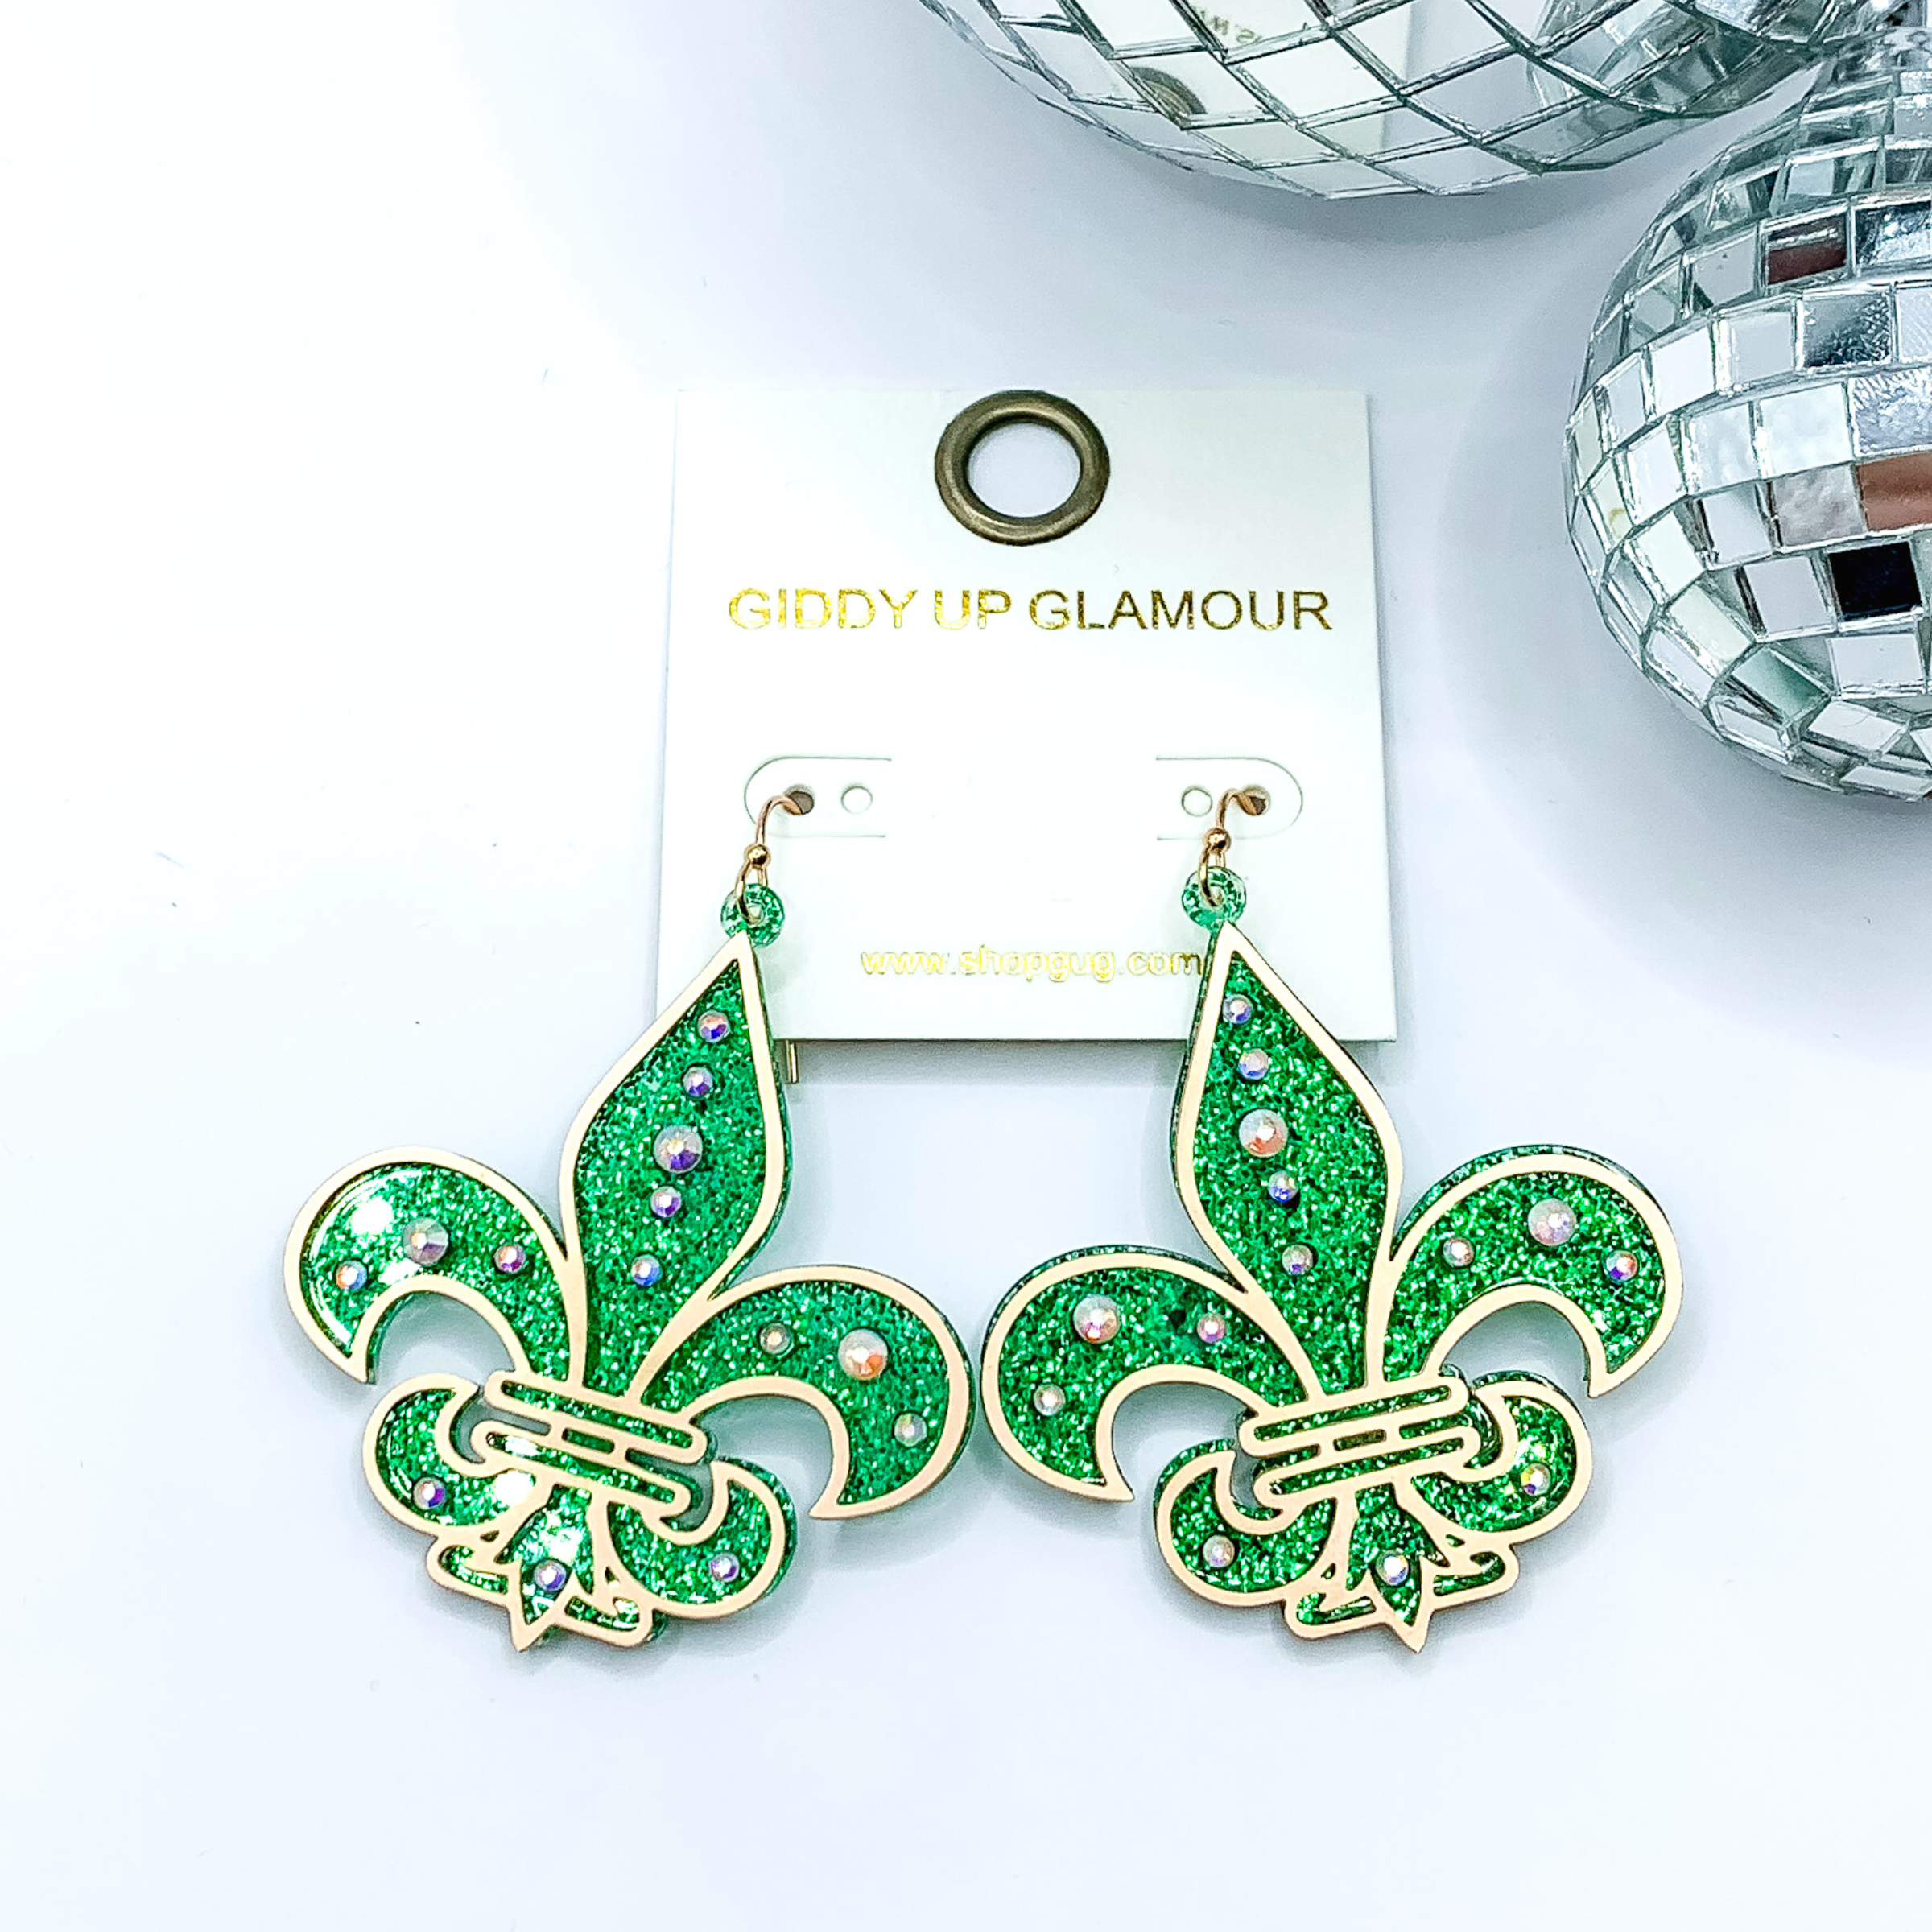 Green glitter fleur de lis dangle earrings. These earrings include a gold outline and ab crystals. These earrings are pictured on a white background with disco balls in the top right corner.